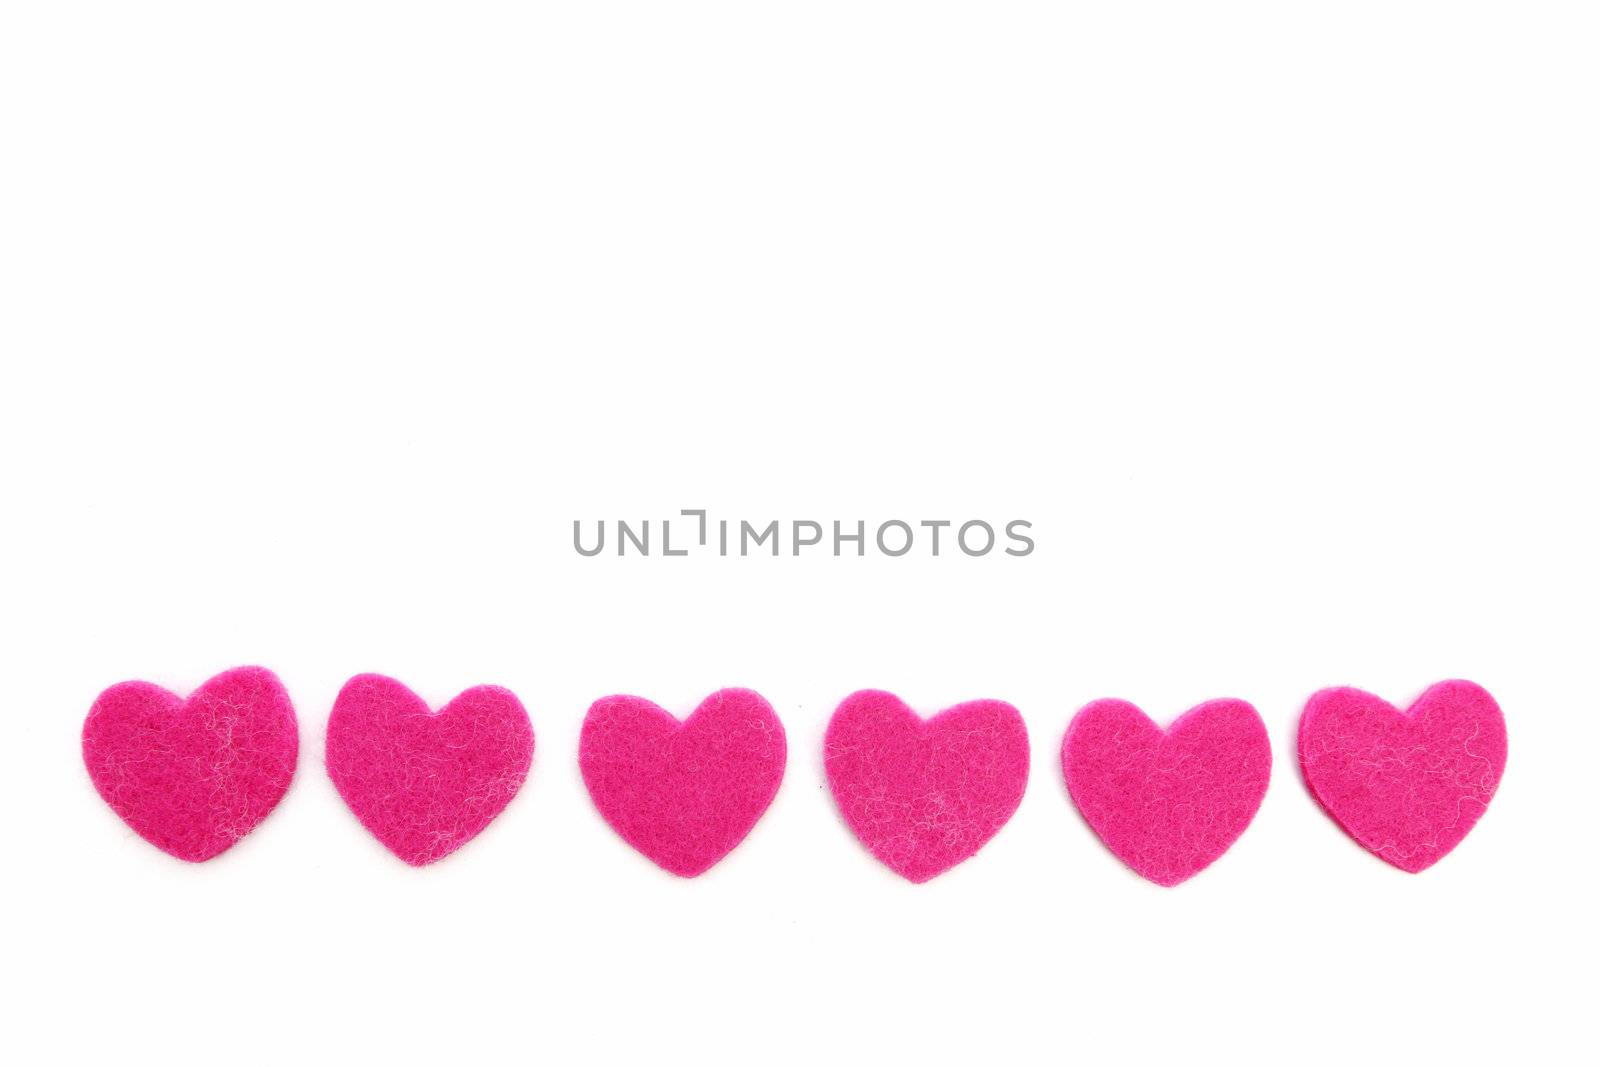 Row of romantic pink hearts made of a textile with a soft fibre texture isolated on white with copyspace for your Valentine or anniversary greeting